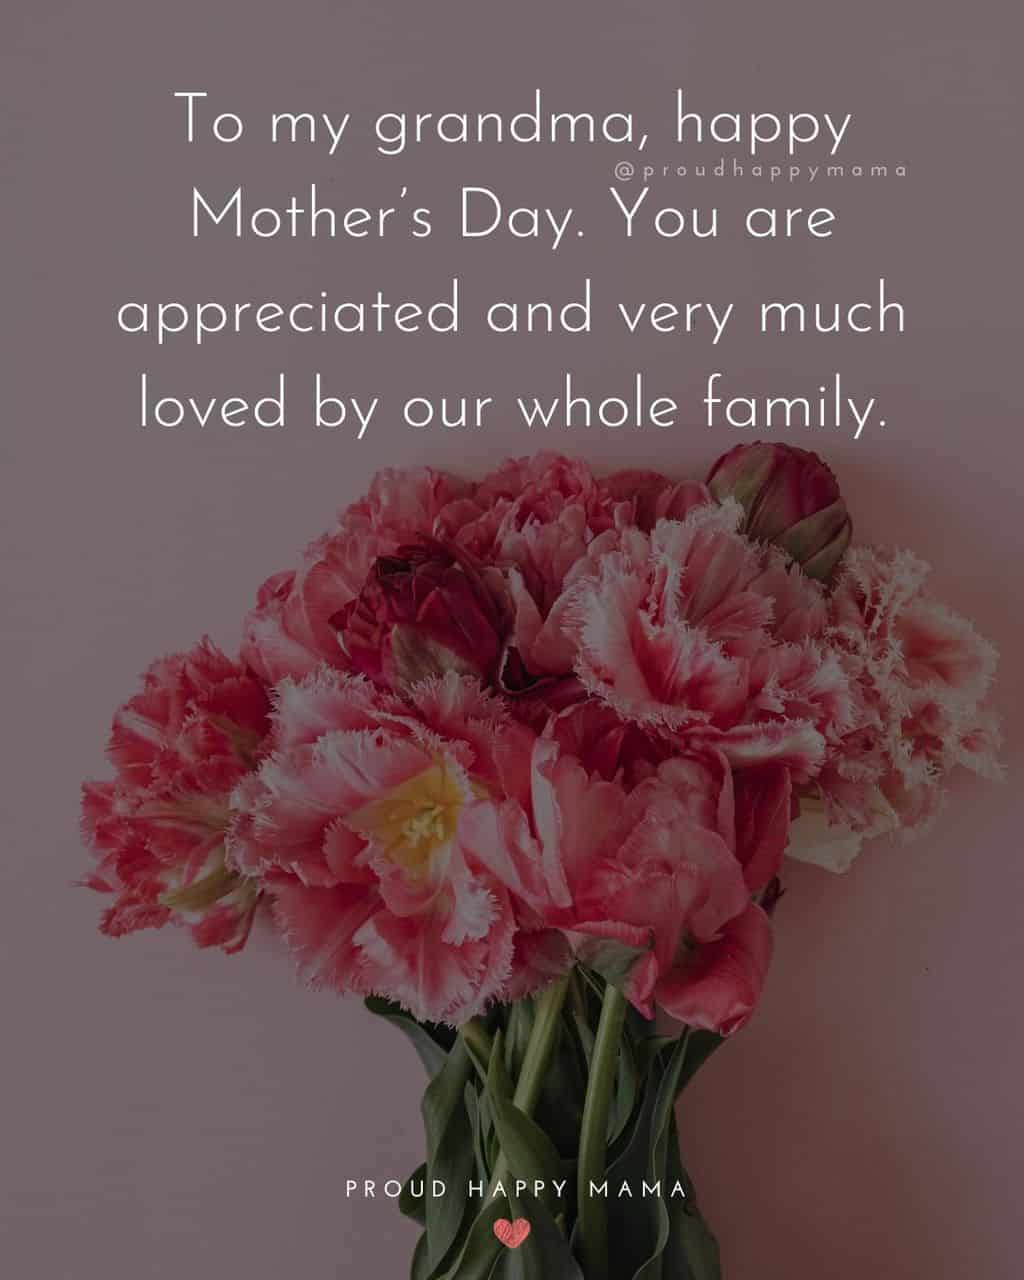 Happy Mothers Day Quotes To Grandma - To my grandma, happy Mother’s Day. You are appreciated and very much loved